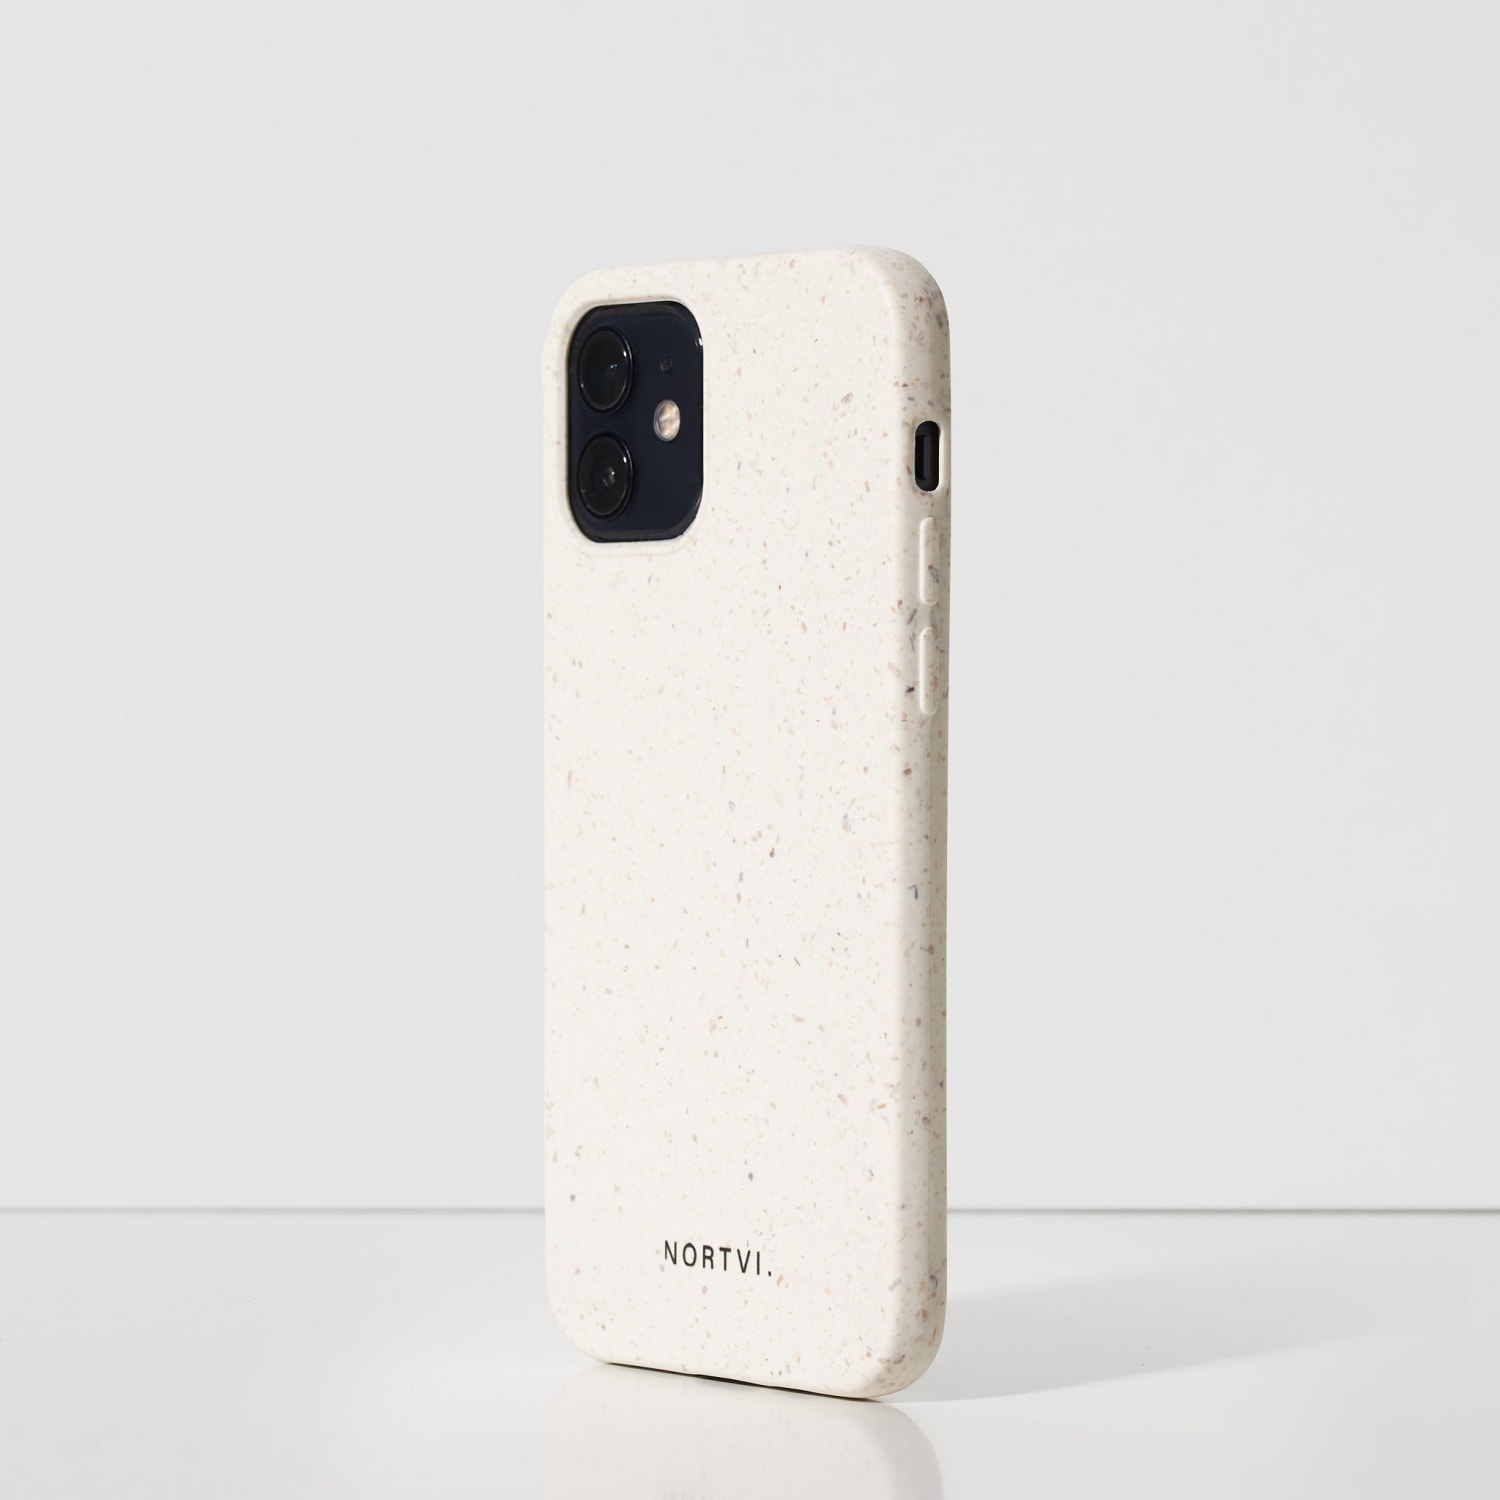 NORTVI white phone case for iPhone 12 case